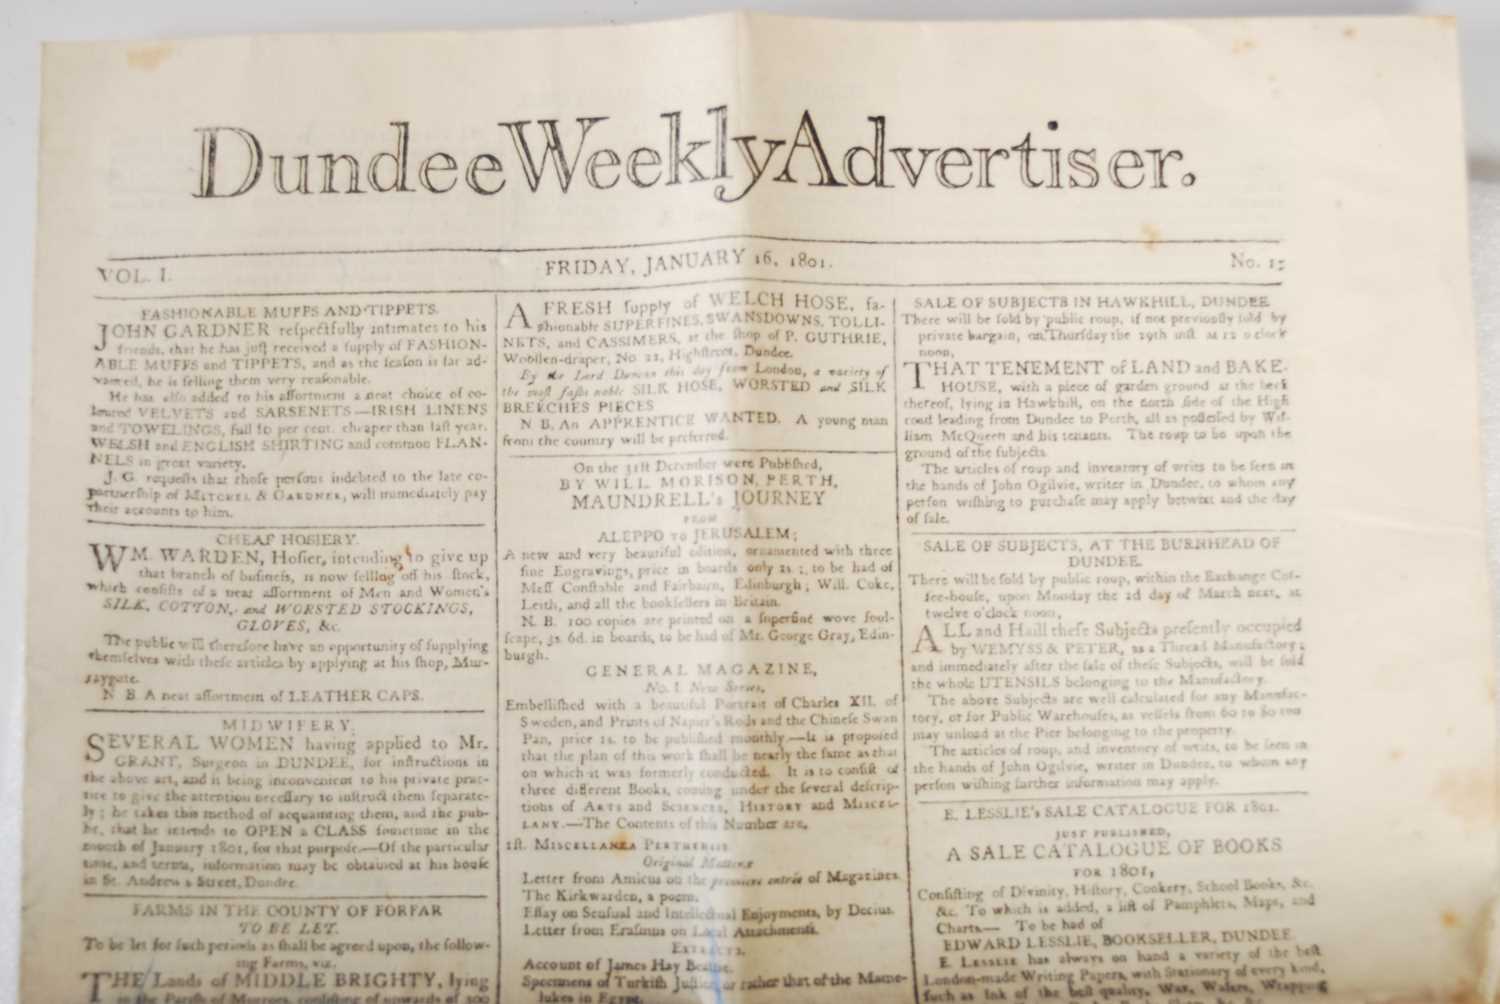 A scarce and rare edition of The Dundee Weekly Advertiser, Vol.I, Friday January 16 1801. - Image 2 of 4